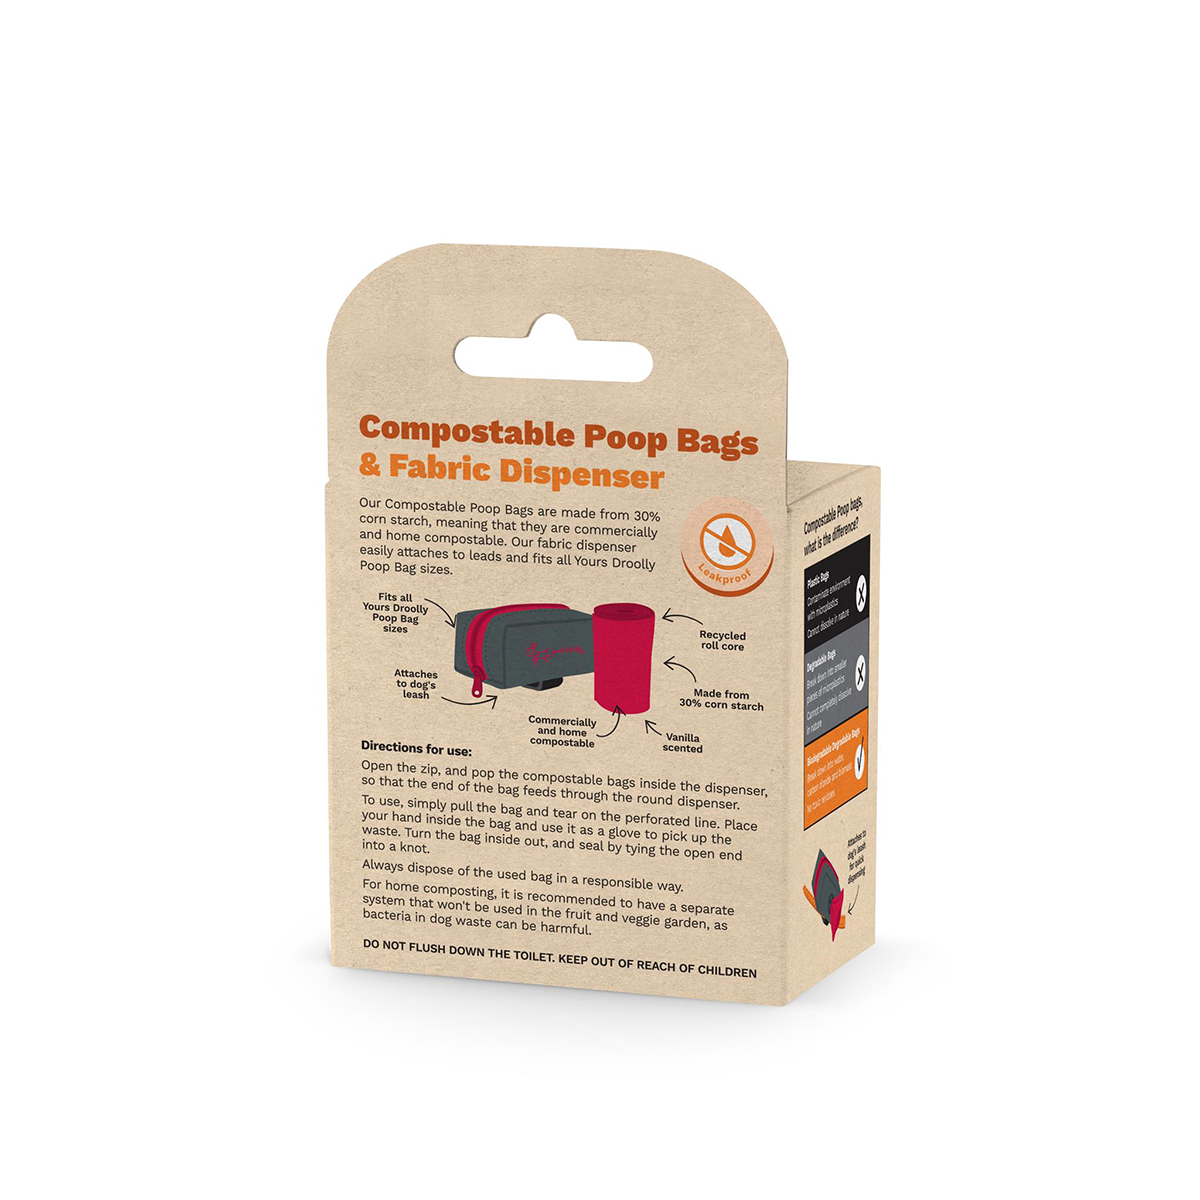 Yours Droolly Compostable Poop Bags with Dispenser